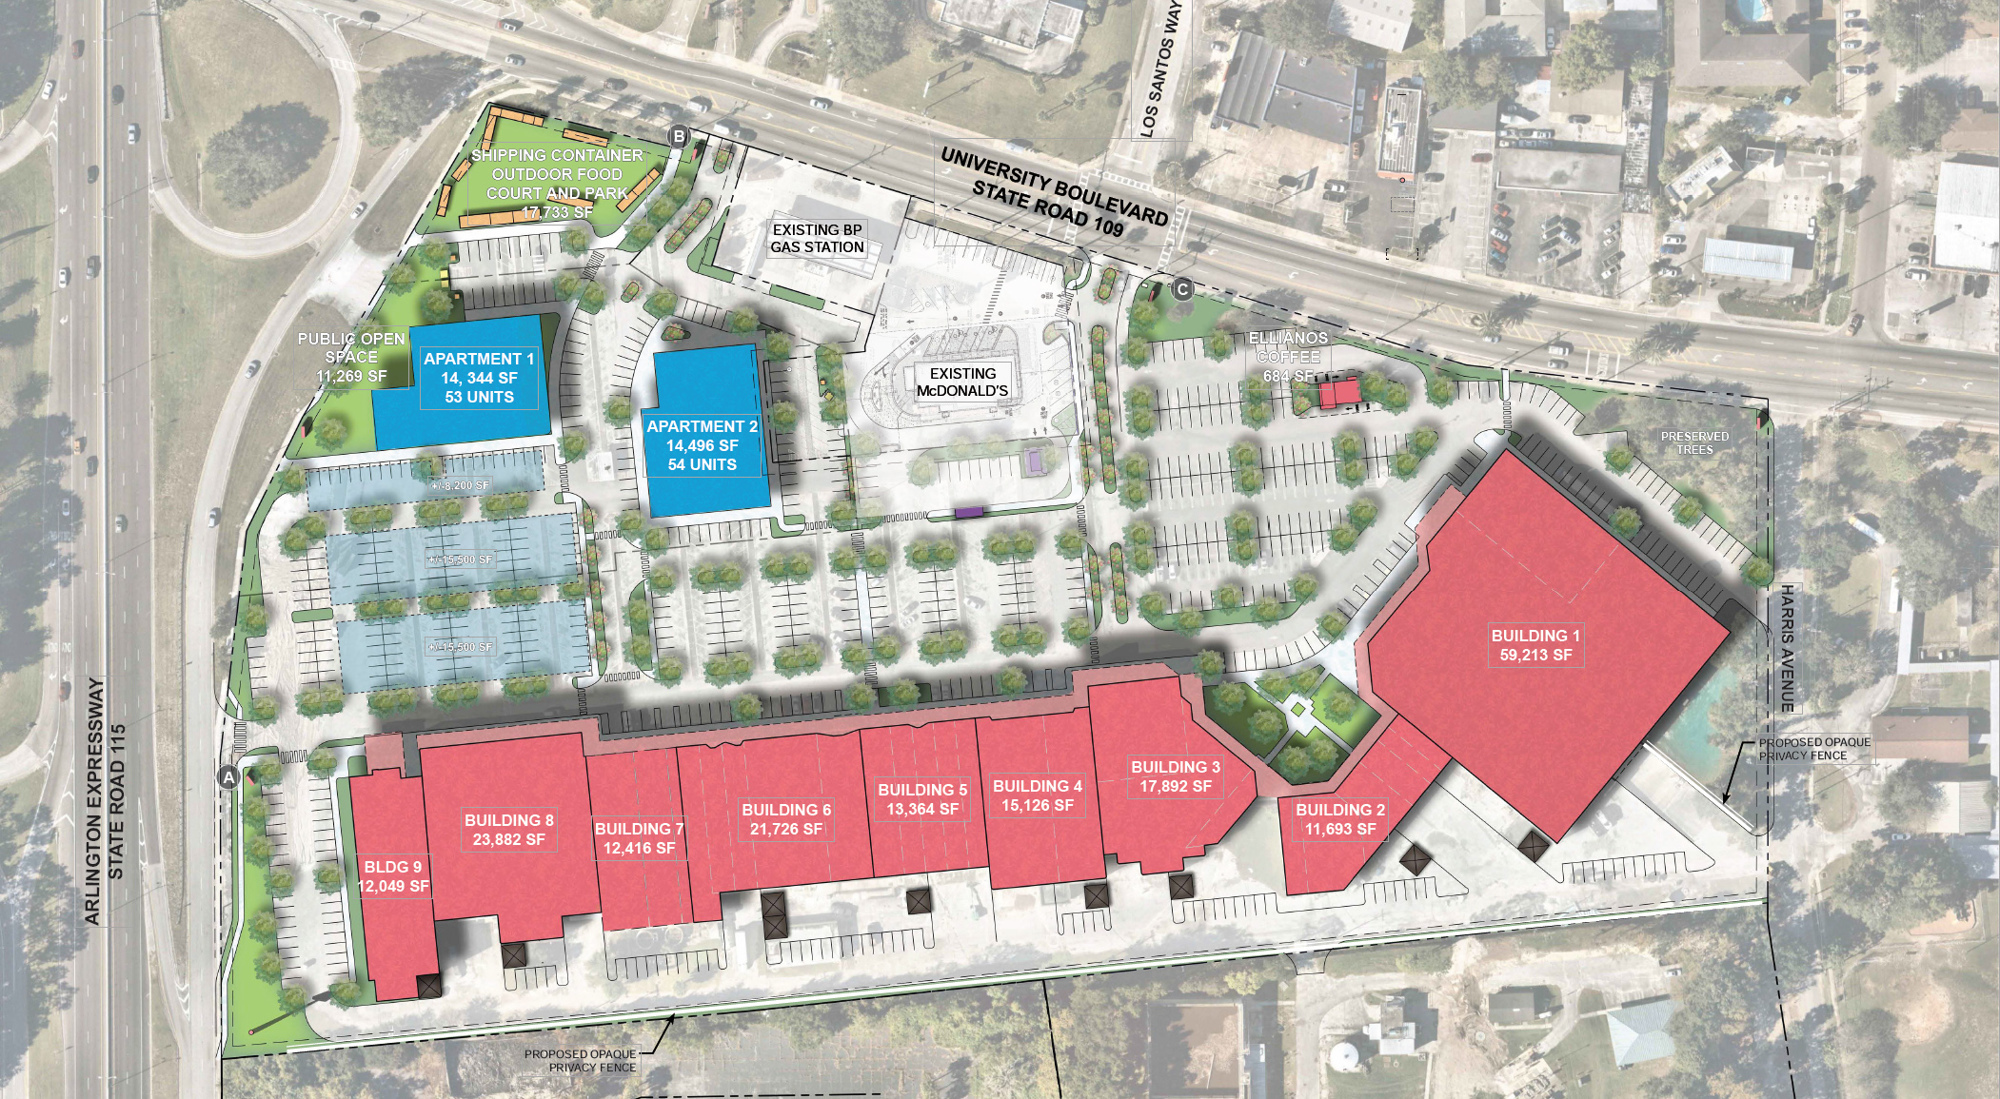 The site plan for College Park, the former Town & Country Shopping Center in Arlington.